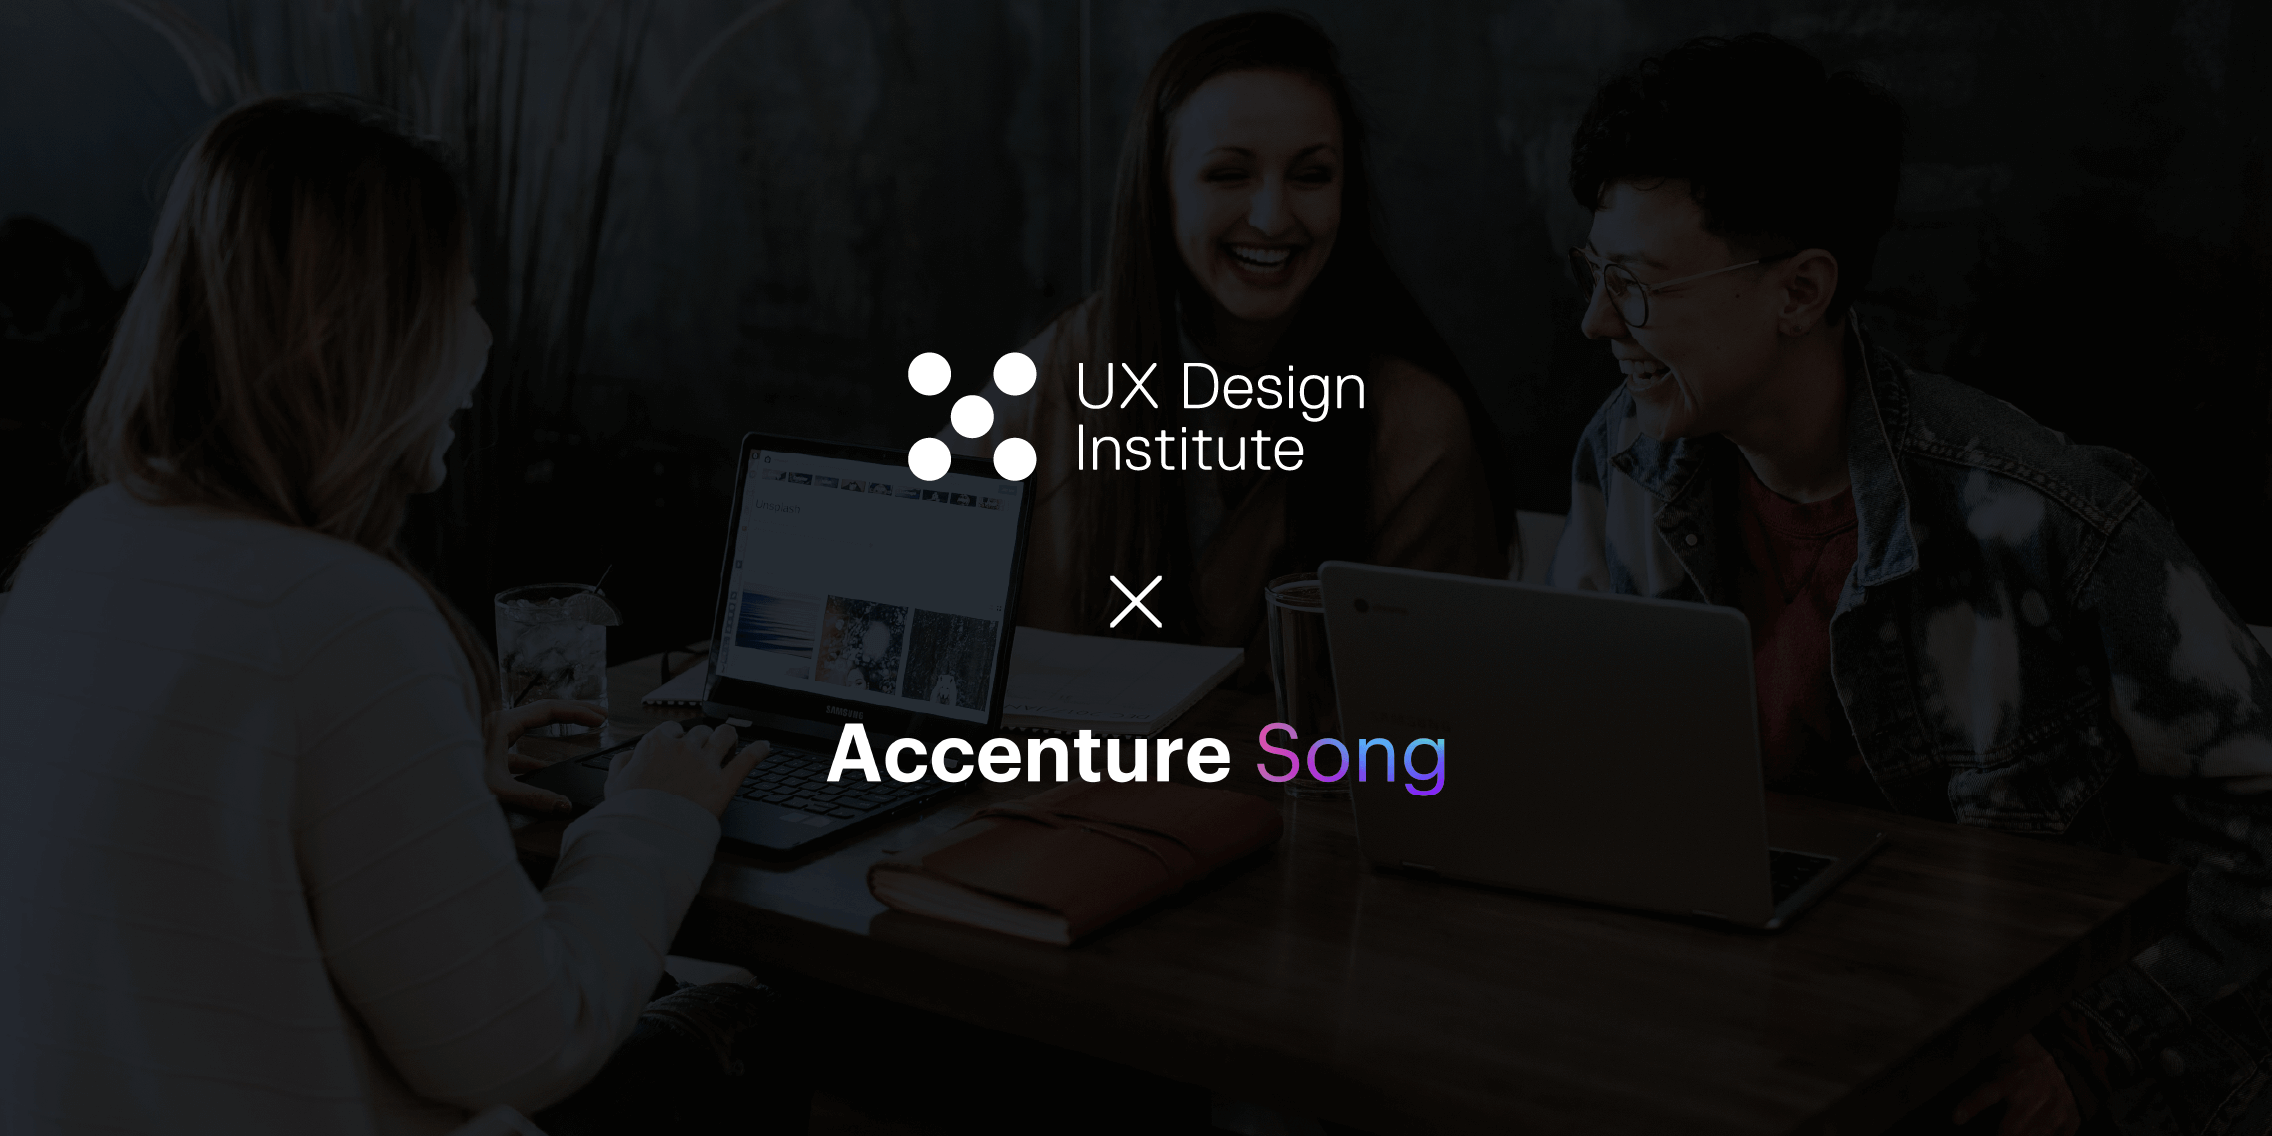 UX Design Institute partners with Accenture Song for Internship Programme